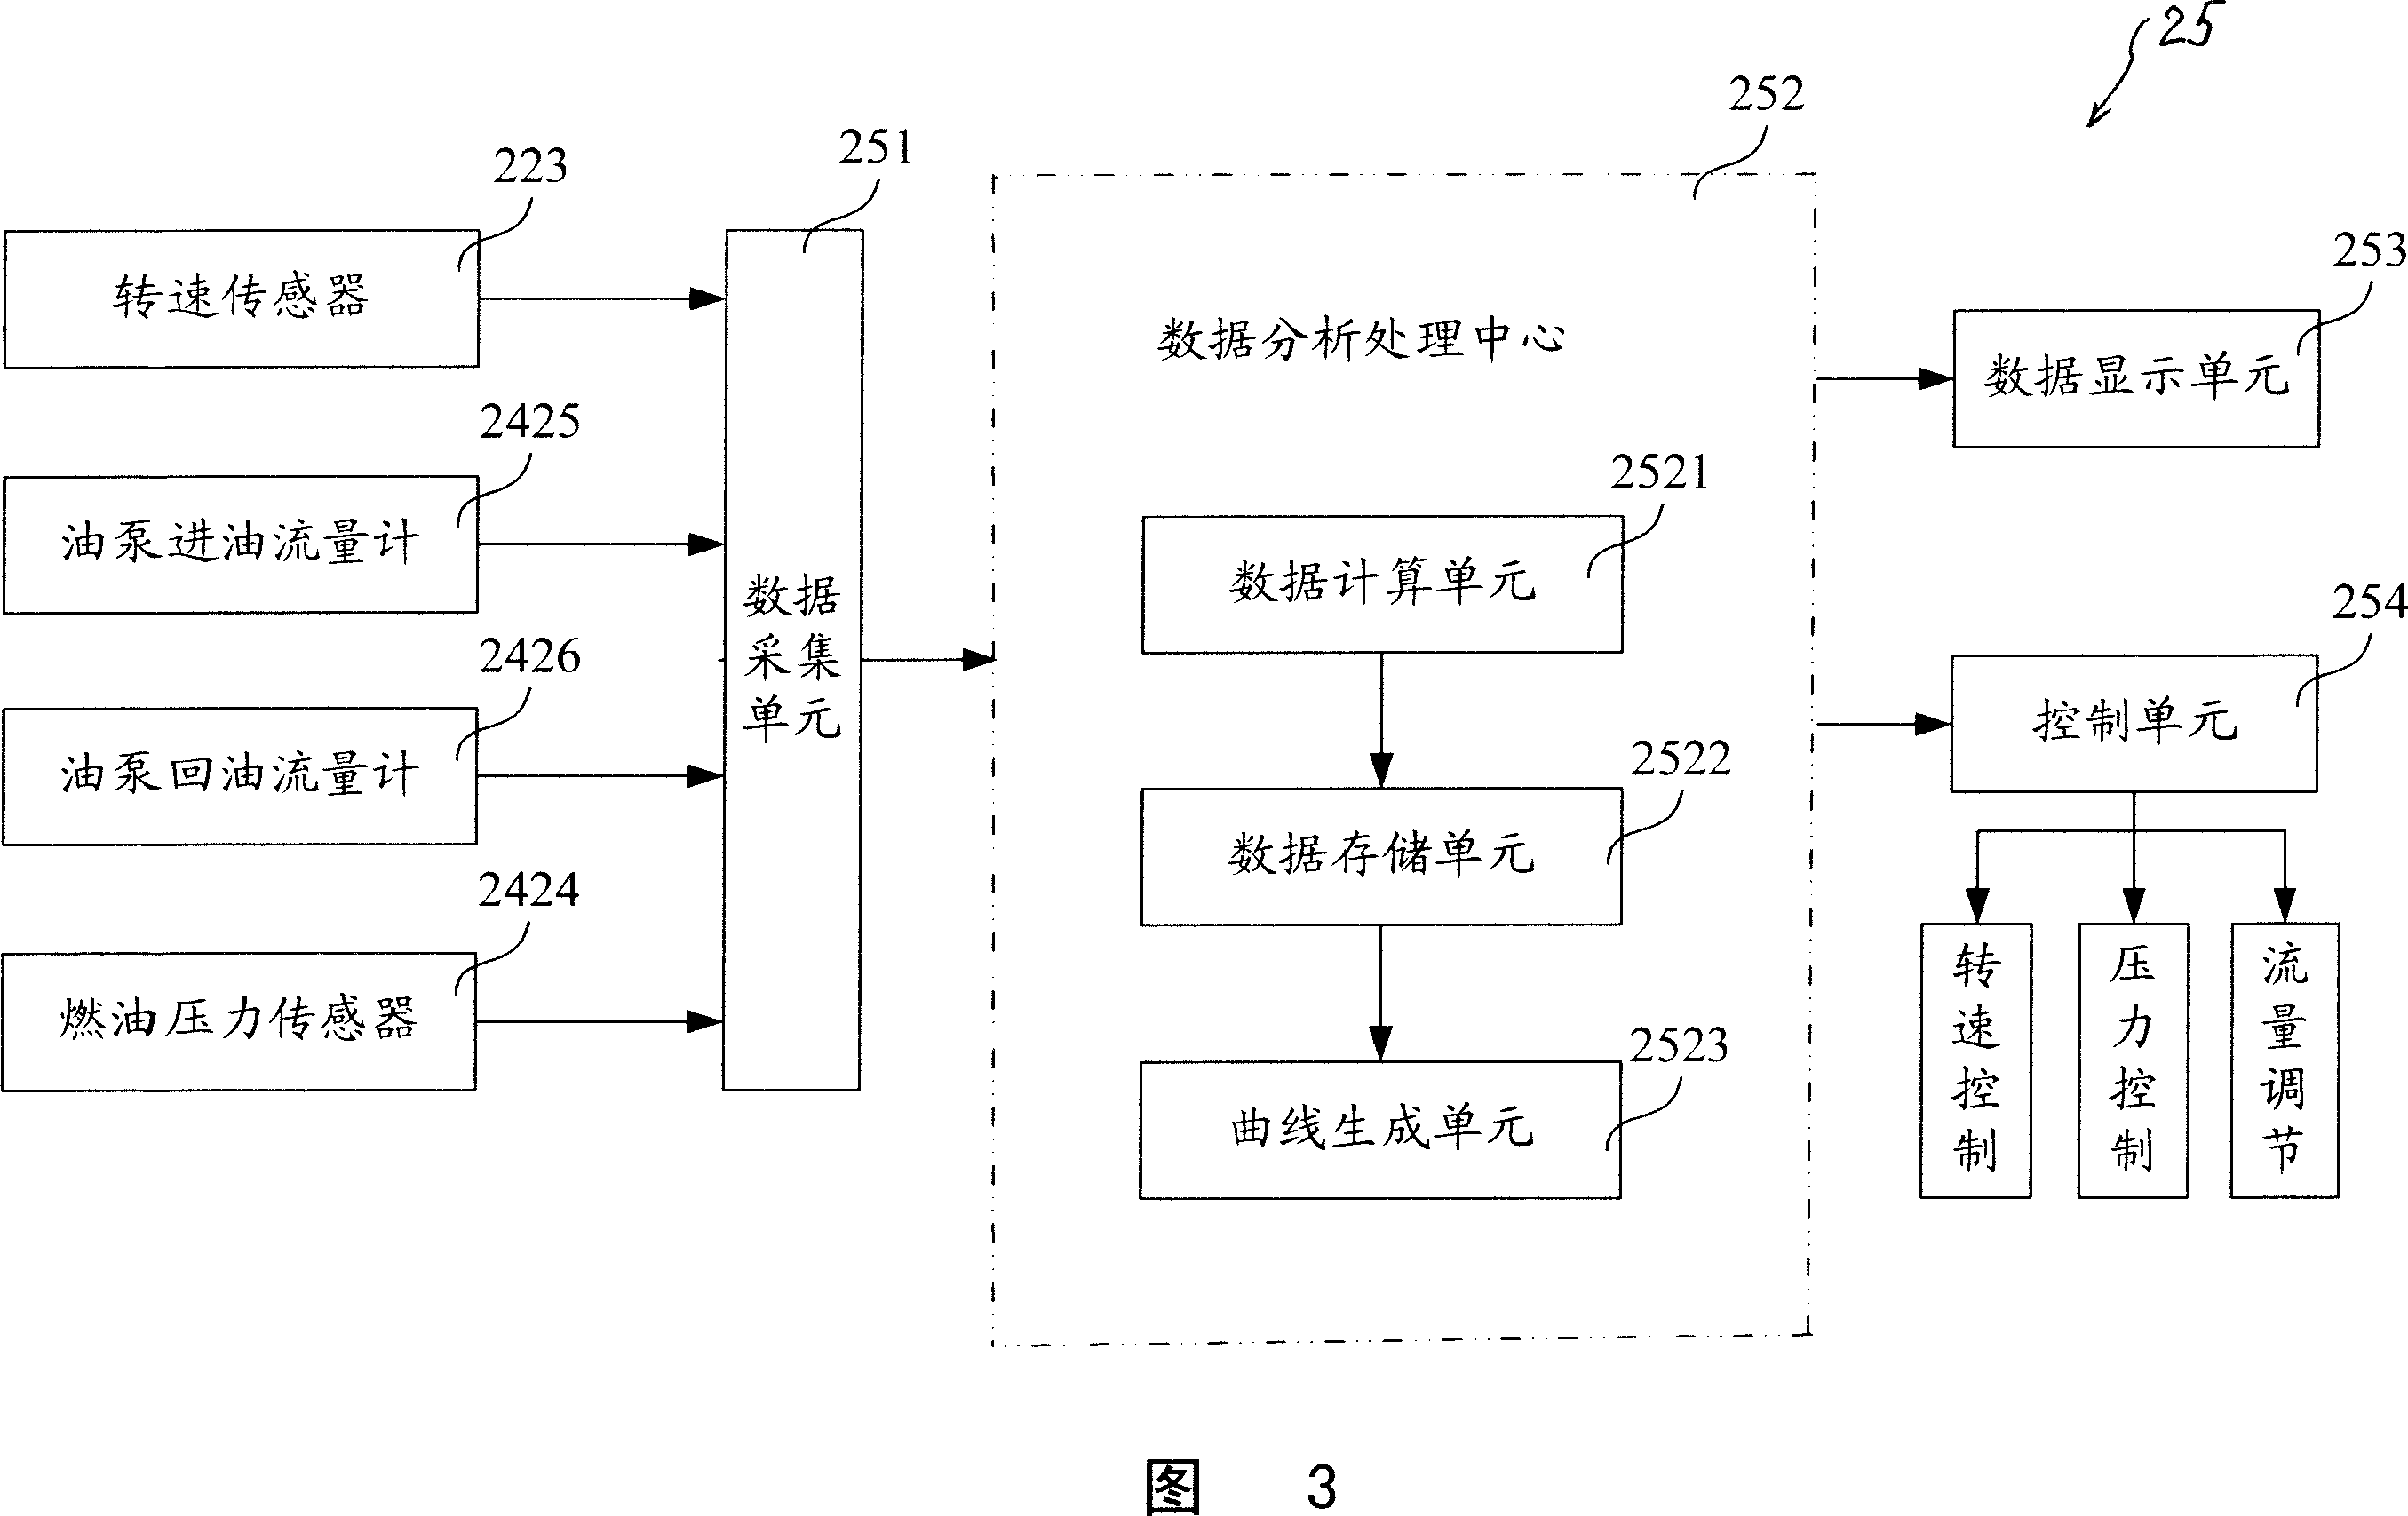 Electric controlled tester and testing method for preformance of high-pressure oil pump in use for coaxial tracks of engines